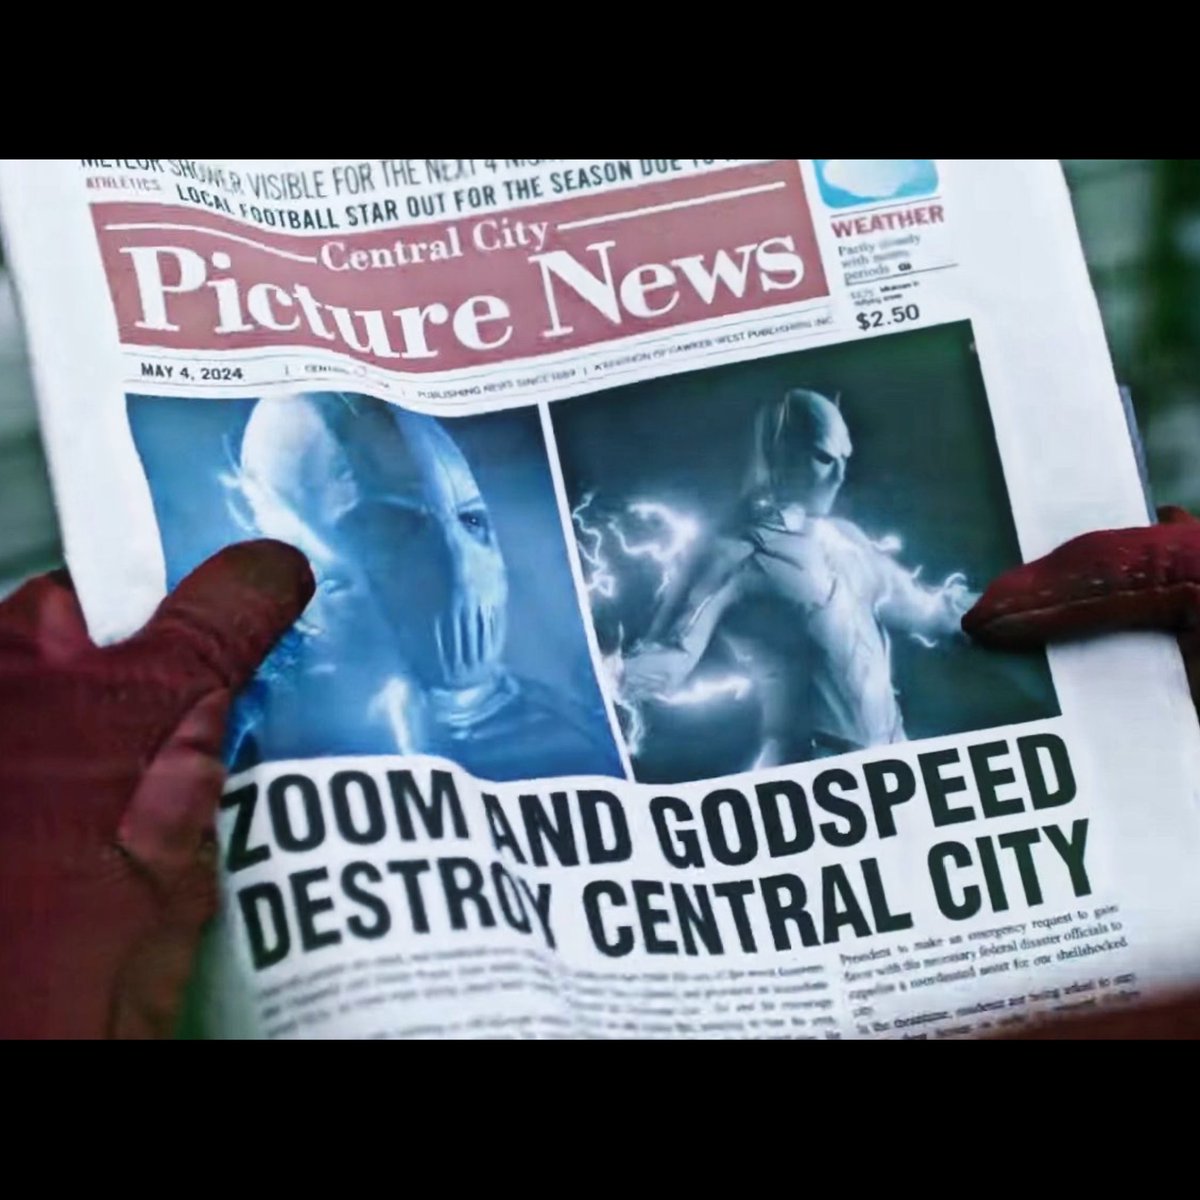 We’re hitting another milestone from The Flash TODAYYYY!!!!!!! 
May 4th 2024, is the day that Zoom and Godspeed are supposed to fulfill this headline & destroy Central City… ⚡️⚡️⚡️